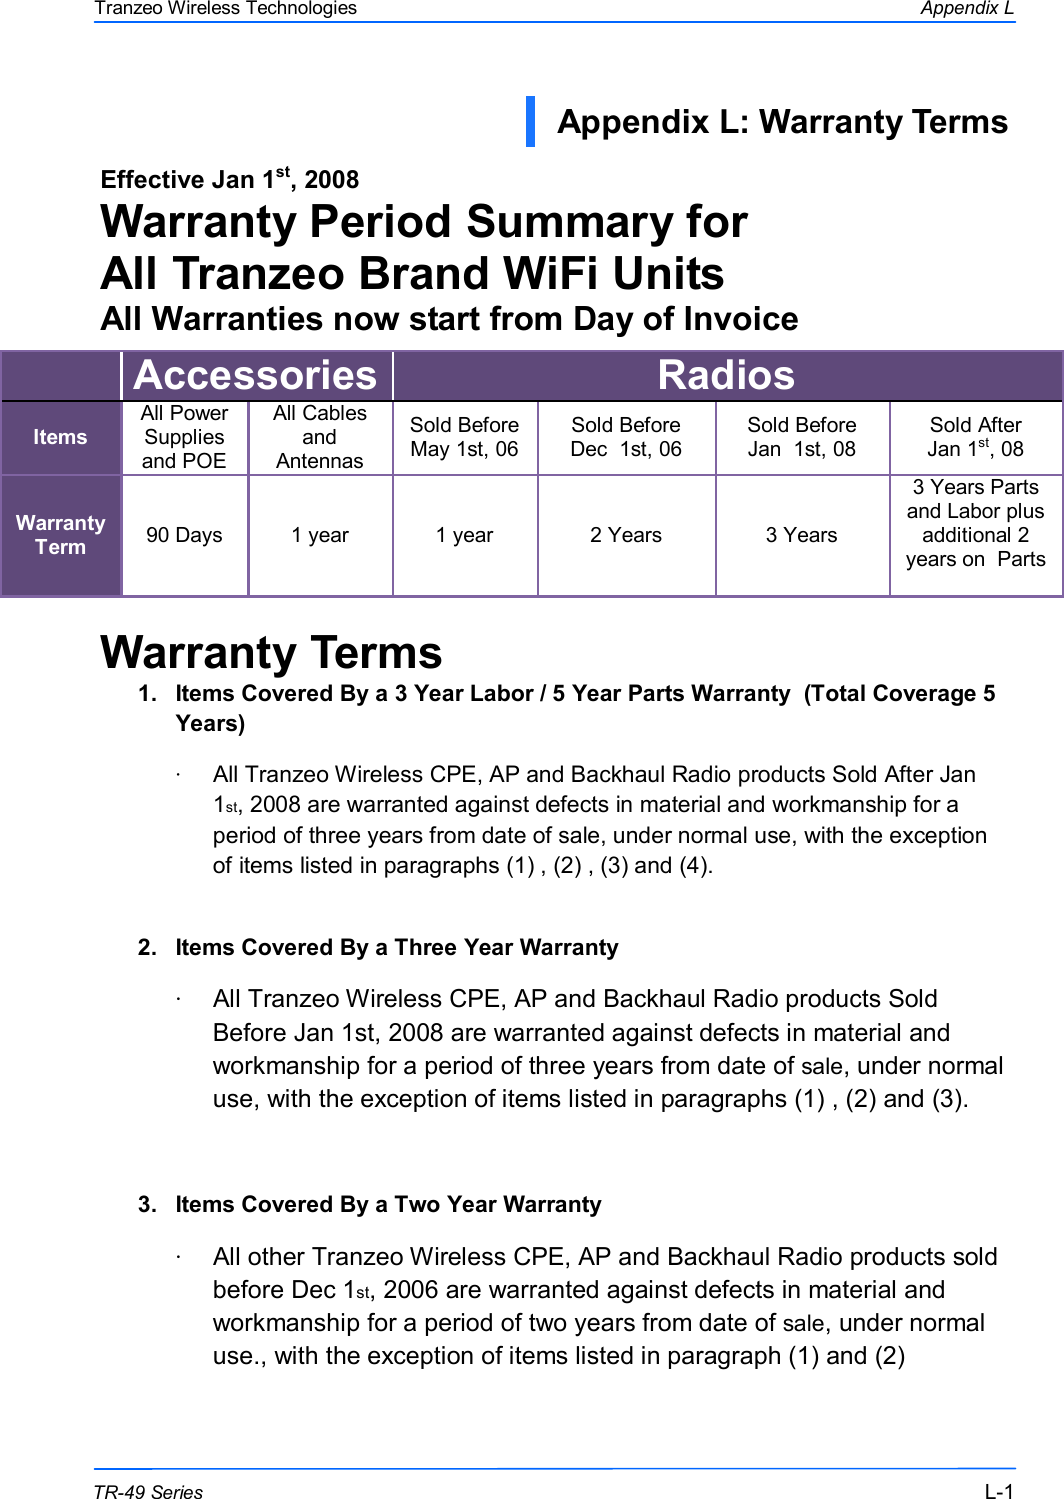  111 This document is intended for Public Distribution                         19473 Fraser Way, Pitt Meadows, B.C. Canada V3Y  2V4 Appendix L L-1 TR-49 Series Tranzeo Wireless Technologies Effective Jan 1st, 2008 Warranty Period Summary for  All Tranzeo Brand WiFi Units  All Warranties now start from Day of Invoice Warranty Terms  1.  Items Covered By a 3 Year Labor / 5 Year Parts Warranty  (Total Coverage 5 Years) ·  All Tranzeo Wireless CPE, AP and Backhaul Radio products Sold After Jan 1st, 2008 are warranted against defects in material and workmanship for a period of three years from date of sale, under normal use, with the exception of items listed in paragraphs (1) , (2) , (3) and (4).    2.  Items Covered By a Three Year Warranty  ·  All Tranzeo Wireless CPE, AP and Backhaul Radio products Sold Before Jan 1st, 2008 are warranted against defects in material and workmanship for a period of three years from date of sale, under normal use, with the exception of items listed in paragraphs (1) , (2) and (3).  3.  Items Covered By a Two Year Warranty ·  All other Tranzeo Wireless CPE, AP and Backhaul Radio products sold before Dec 1st, 2006 are warranted against defects in material and workmanship for a period of two years from date of sale, under normal use., with the exception of items listed in paragraph (1) and (2)  Appendix L: Warranty Terms    Accessories Radios Items All Power Supplies and POE All Cables and Antennas Sold Before  May 1st, 06 Sold Before  Dec  1st, 06 Sold Before   Jan  1st, 08 Sold After  Jan 1st, 08 Warranty Term 90 Days 1 year 1 year 2 Years 3 Years 3 Years Parts and Labor plus additional 2 years on  Parts   